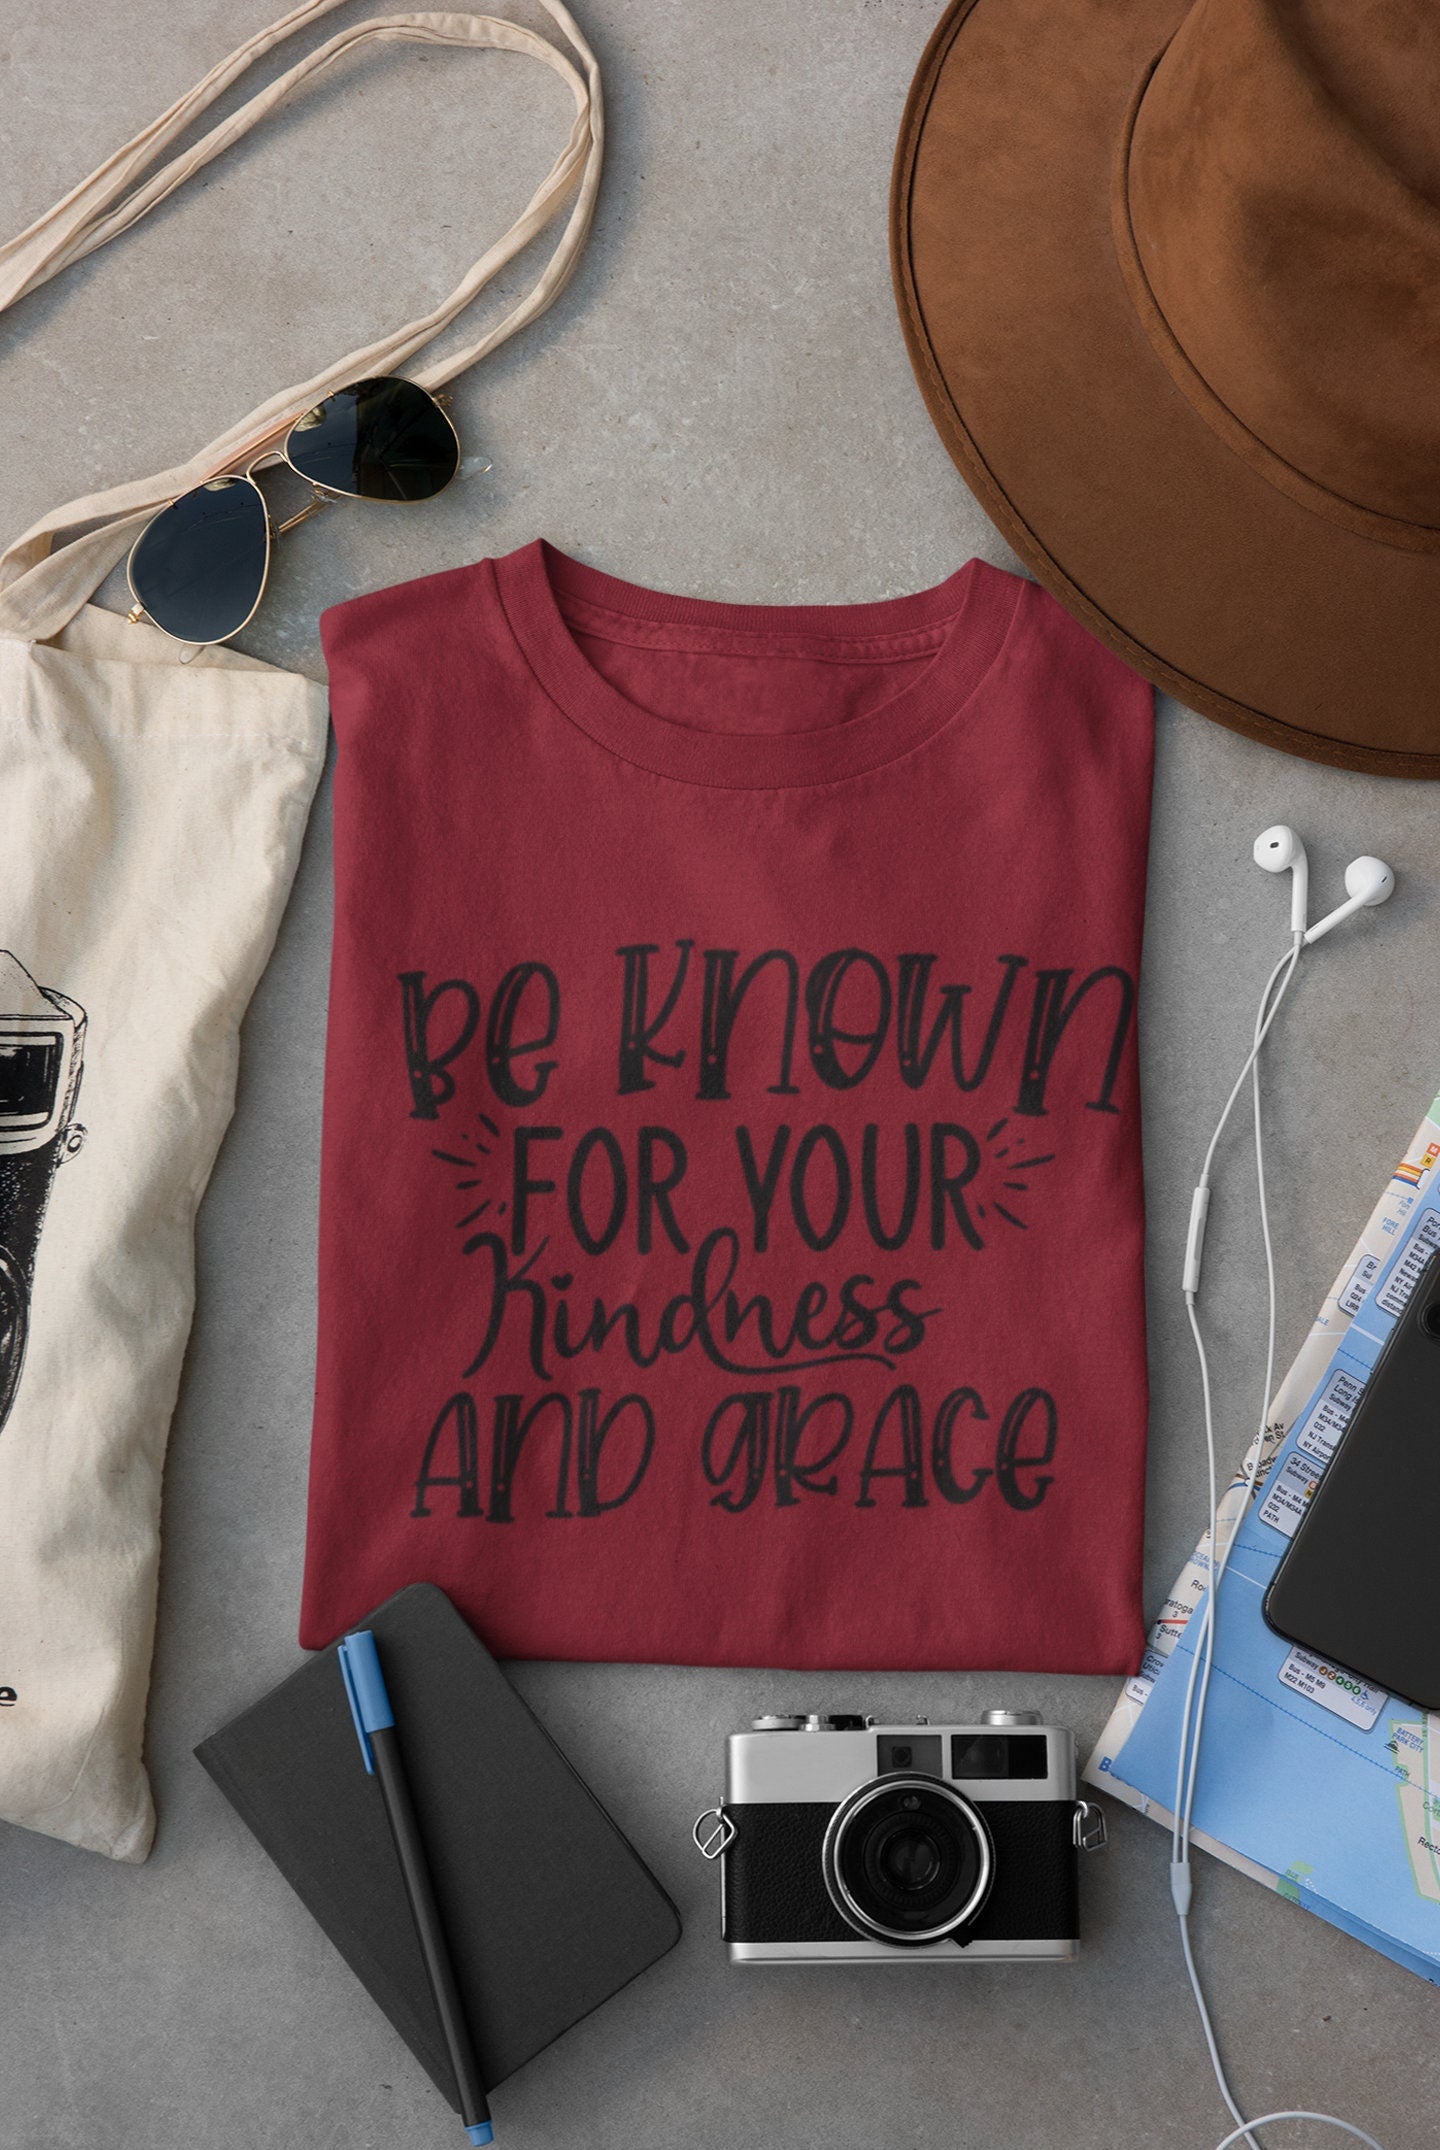 Be Known For Your Kindness and Grace, Christian Shirt, Faith Shirt, Inspirational Shirt, Motivational Shirt, Love Shirt, Unisex Shirt